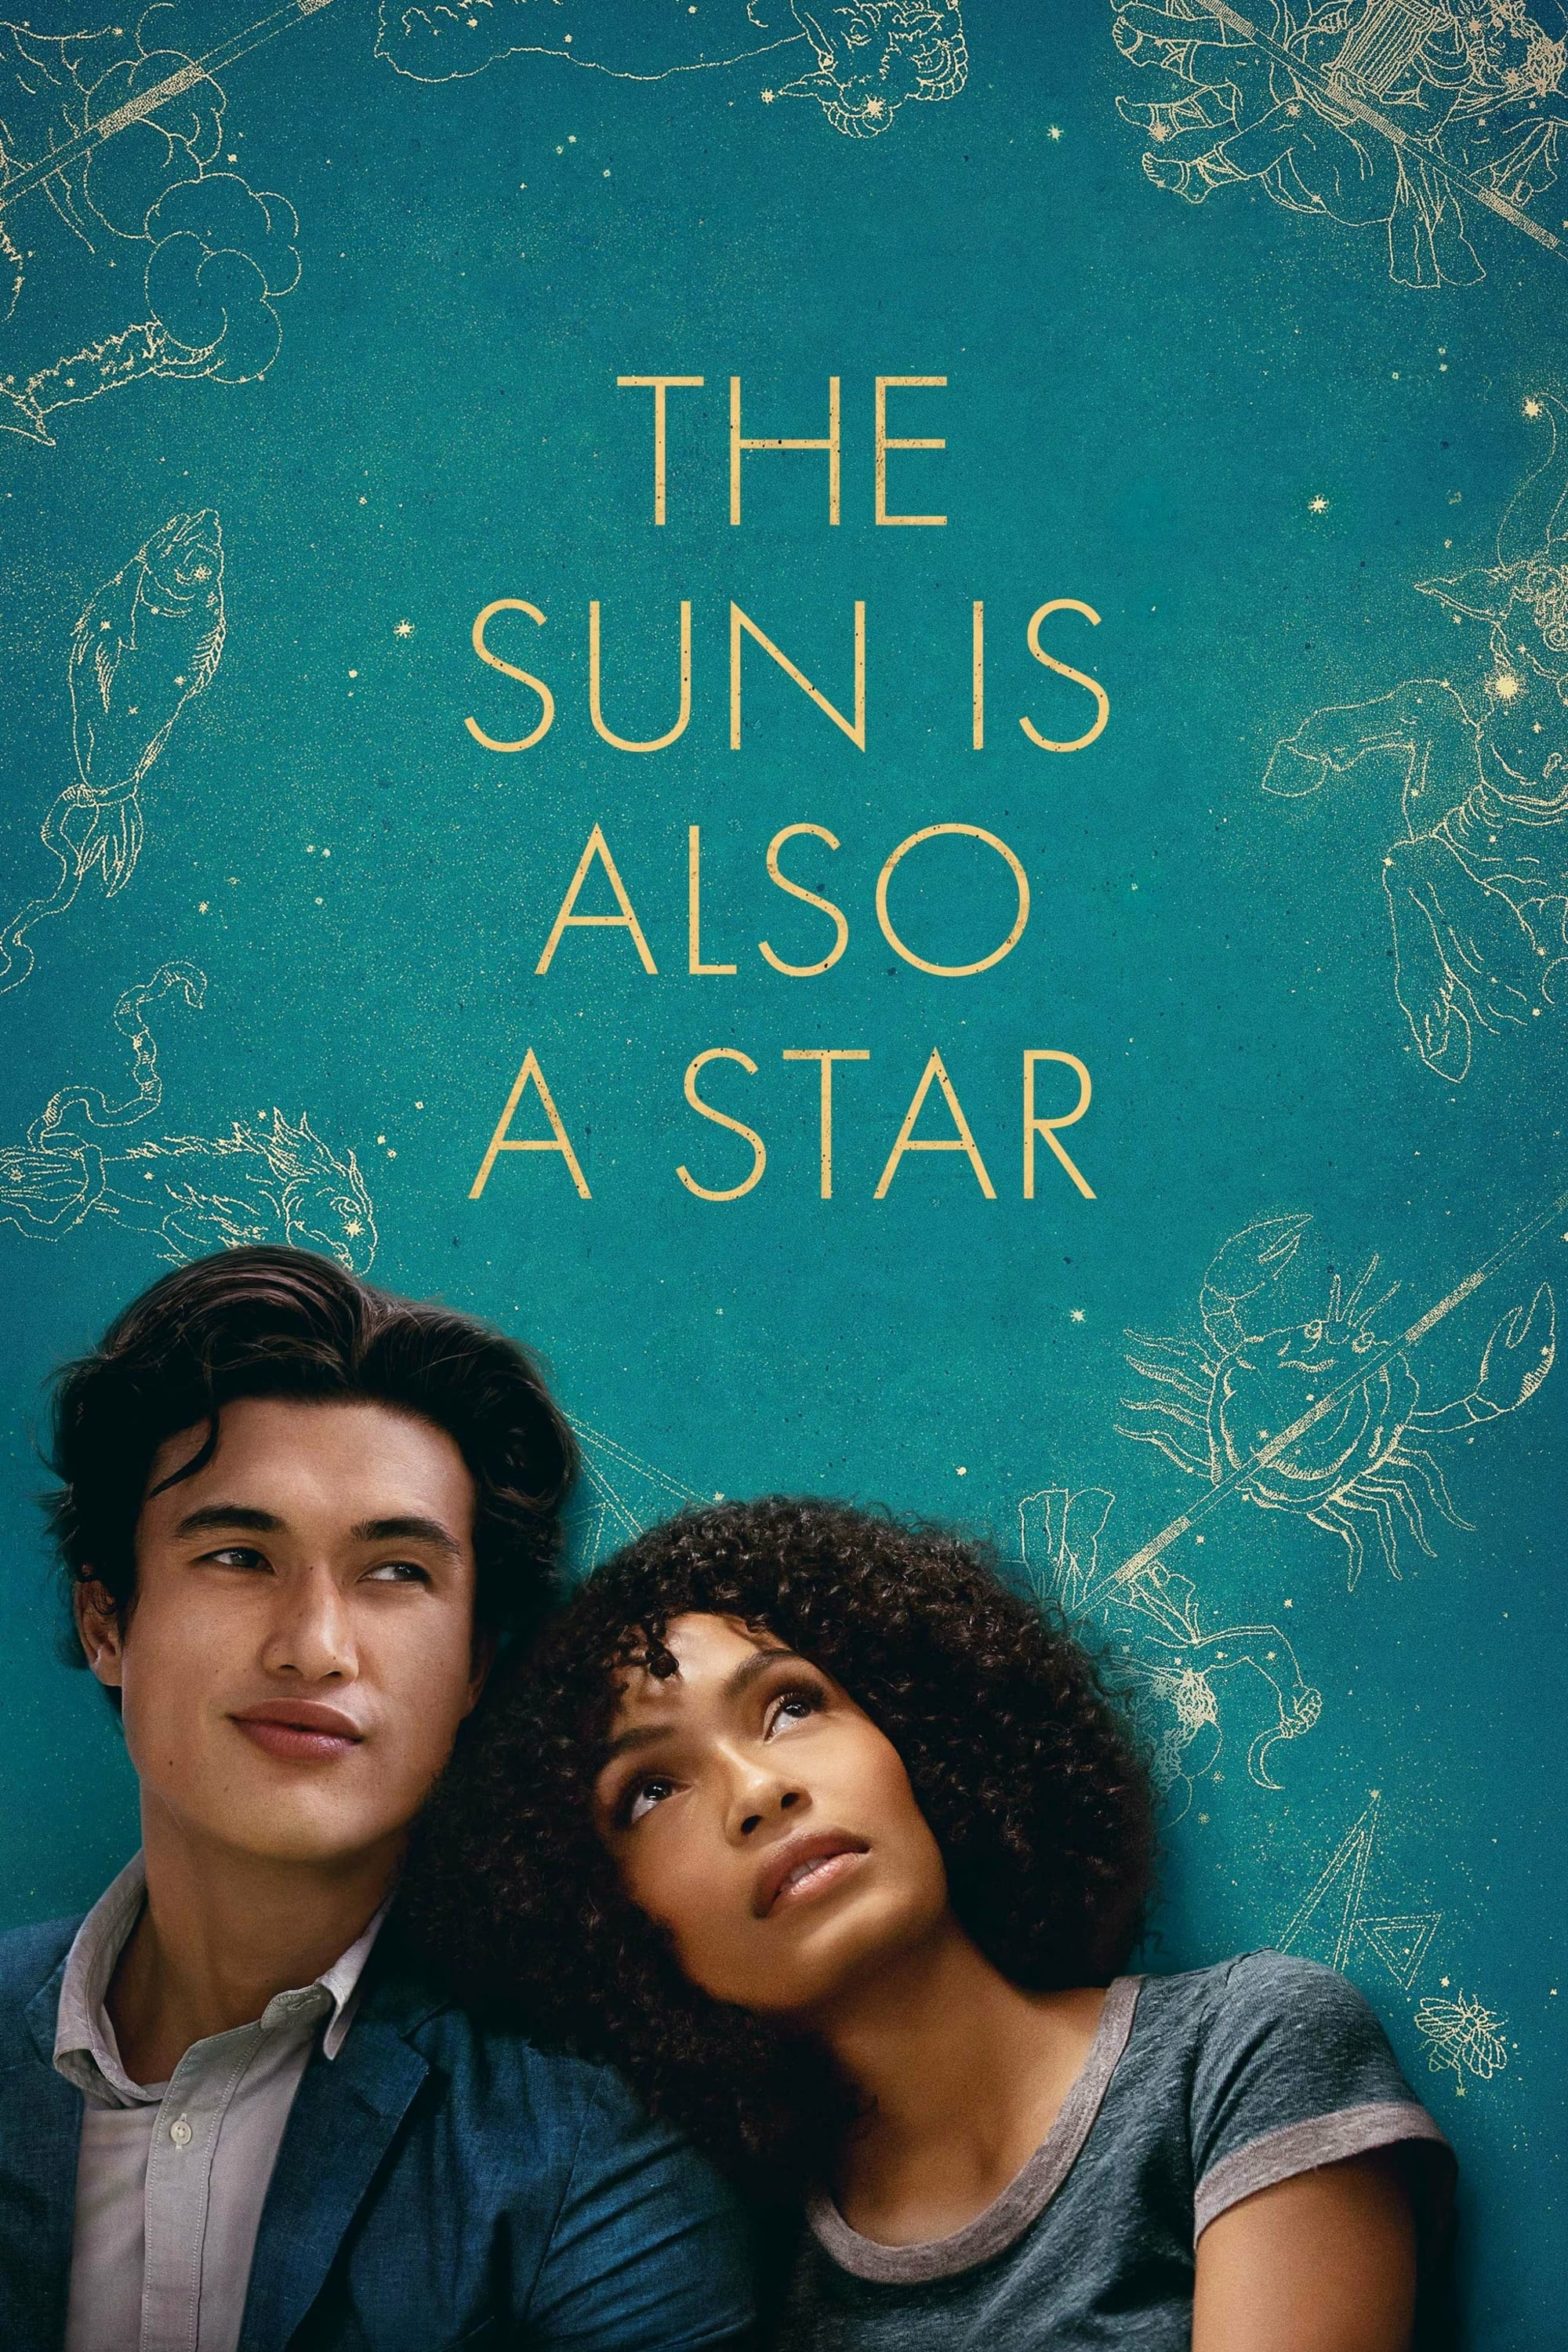 Poster for the movie "The Sun Is Also a Star"